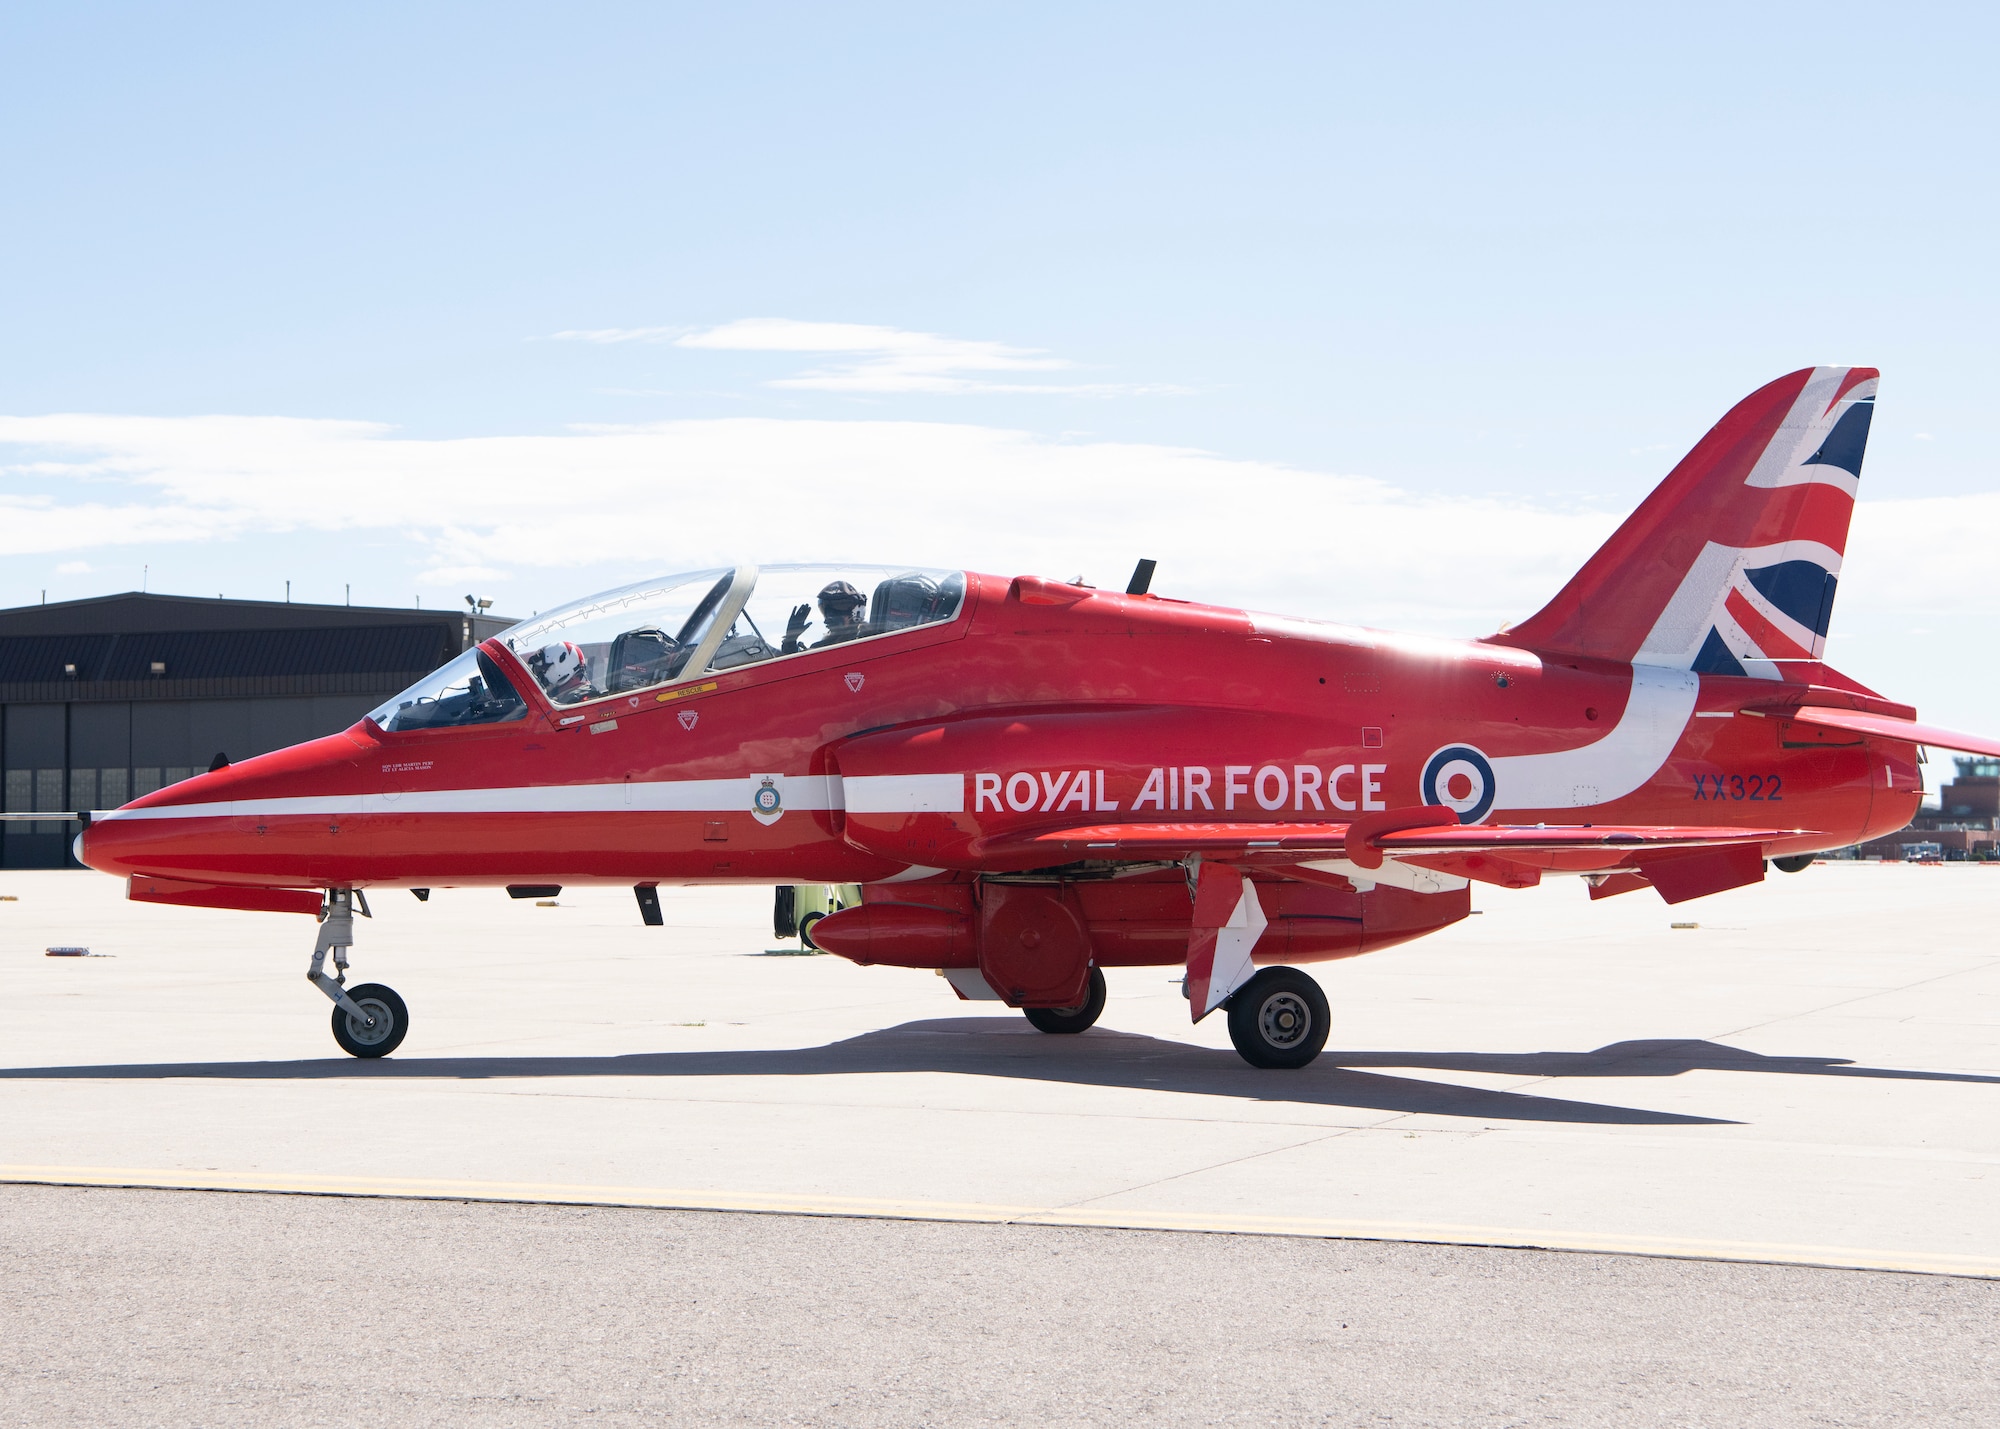 A member of the Royal Air Force demonstration team, the Red Arrows, waves from the cockpit of a Hawk T1 aircraft Sept. 16, 2019 at Peterson Air Force Base, Colorado. The team stopped at the base briefly as part of their North American tour. (U.S. Air Force photo by Heather Heiney)